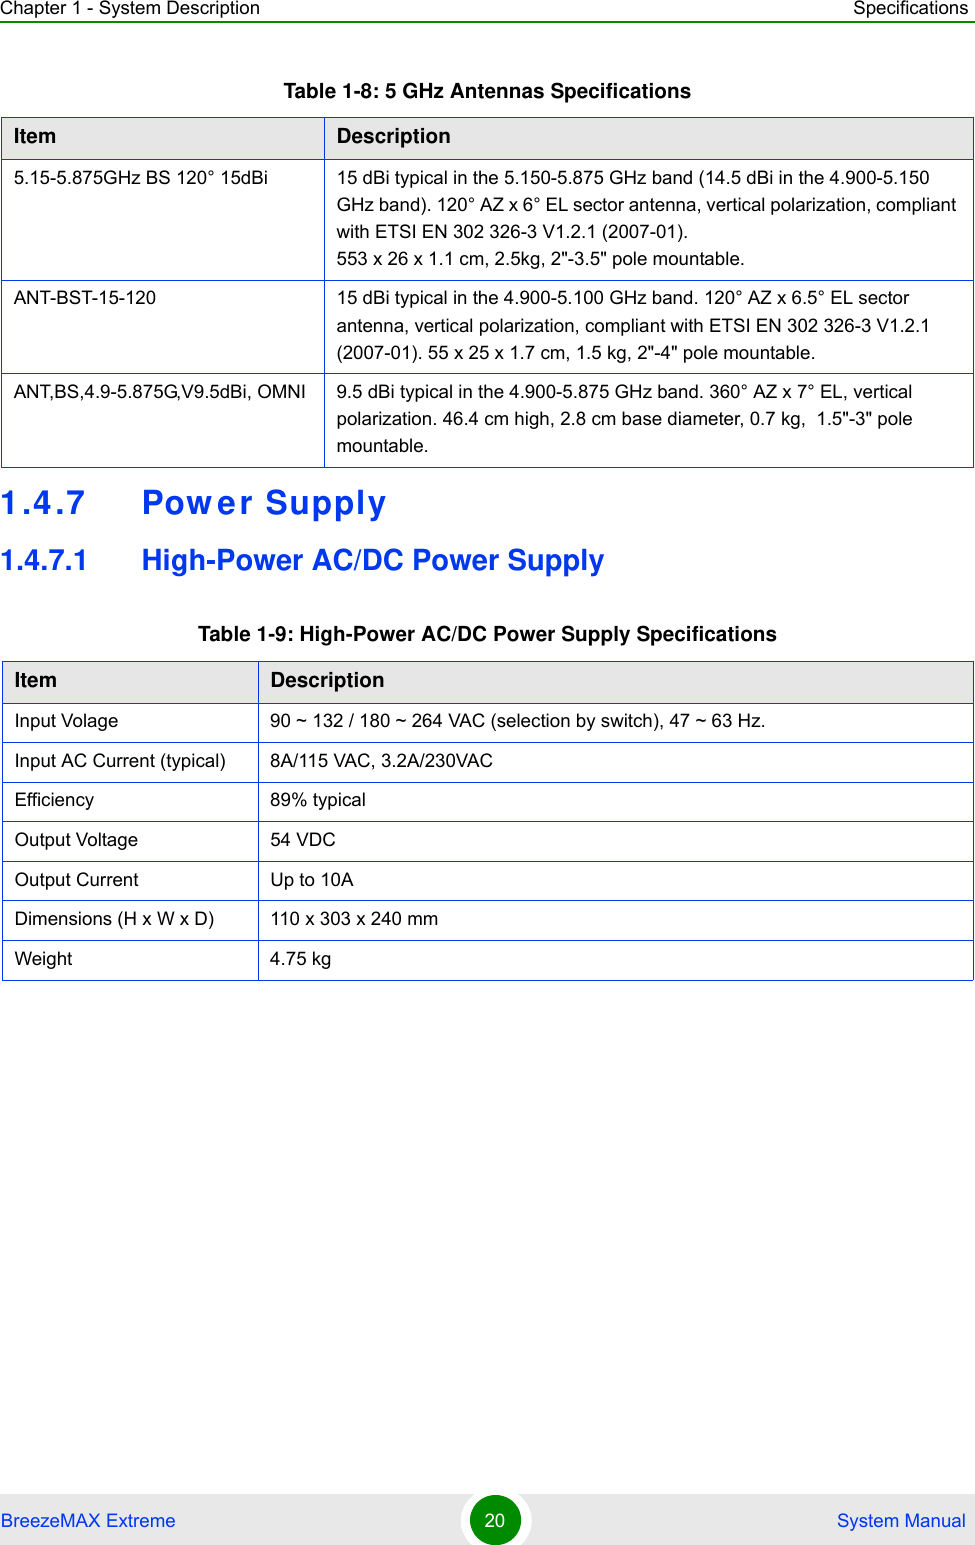 Chapter 1 - System Description SpecificationsBreezeMAX Extreme 20  System Manual1.4.7 Pow er Supply1.4.7.1 High-Power AC/DC Power Supply5.15-5.875GHz BS 120° 15dBi 15 dBi typical in the 5.150-5.875 GHz band (14.5 dBi in the 4.900-5.150 GHz band). 120° AZ x 6° EL sector antenna, vertical polarization, compliant with ETSI EN 302 326-3 V1.2.1 (2007-01).553 x 26 x 1.1 cm, 2.5kg, 2&quot;-3.5&quot; pole mountable.ANT-BST-15-120 15 dBi typical in the 4.900-5.100 GHz band. 120° AZ x 6.5° EL sector antenna, vertical polarization, compliant with ETSI EN 302 326-3 V1.2.1 (2007-01). 55 x 25 x 1.7 cm, 1.5 kg, 2&quot;-4&quot; pole mountable.ANT,BS,4.9-5.875G,V9.5dBi, OMNI 9.5 dBi typical in the 4.900-5.875 GHz band. 360° AZ x 7° EL, vertical polarization. 46.4 cm high, 2.8 cm base diameter, 0.7 kg,  1.5&quot;-3&quot; pole mountable.Table 1-9: High-Power AC/DC Power Supply SpecificationsItem DescriptionInput Volage 90 ~ 132 / 180 ~ 264 VAC (selection by switch), 47 ~ 63 Hz.Input AC Current (typical) 8A/115 VAC, 3.2A/230VACEfficiency 89% typicalOutput Voltage 54 VDCOutput Current Up to 10ADimensions (H x W x D) 110 x 303 x 240 mmWeight 4.75 kgTable 1-8: 5 GHz Antennas SpecificationsItem Description